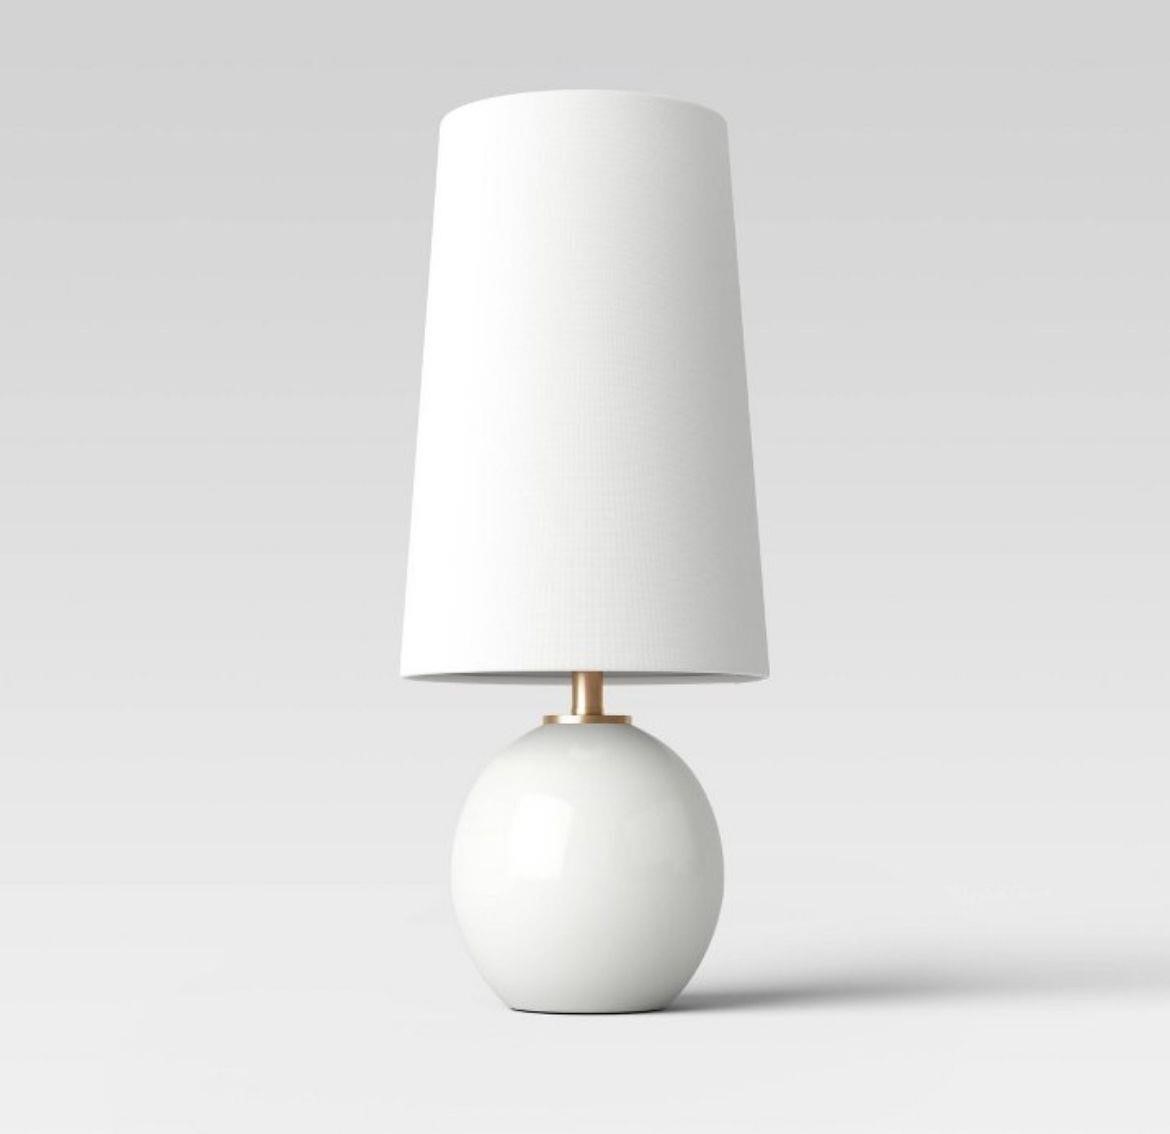 21"X9" MARBLE TABLE LAMP $60